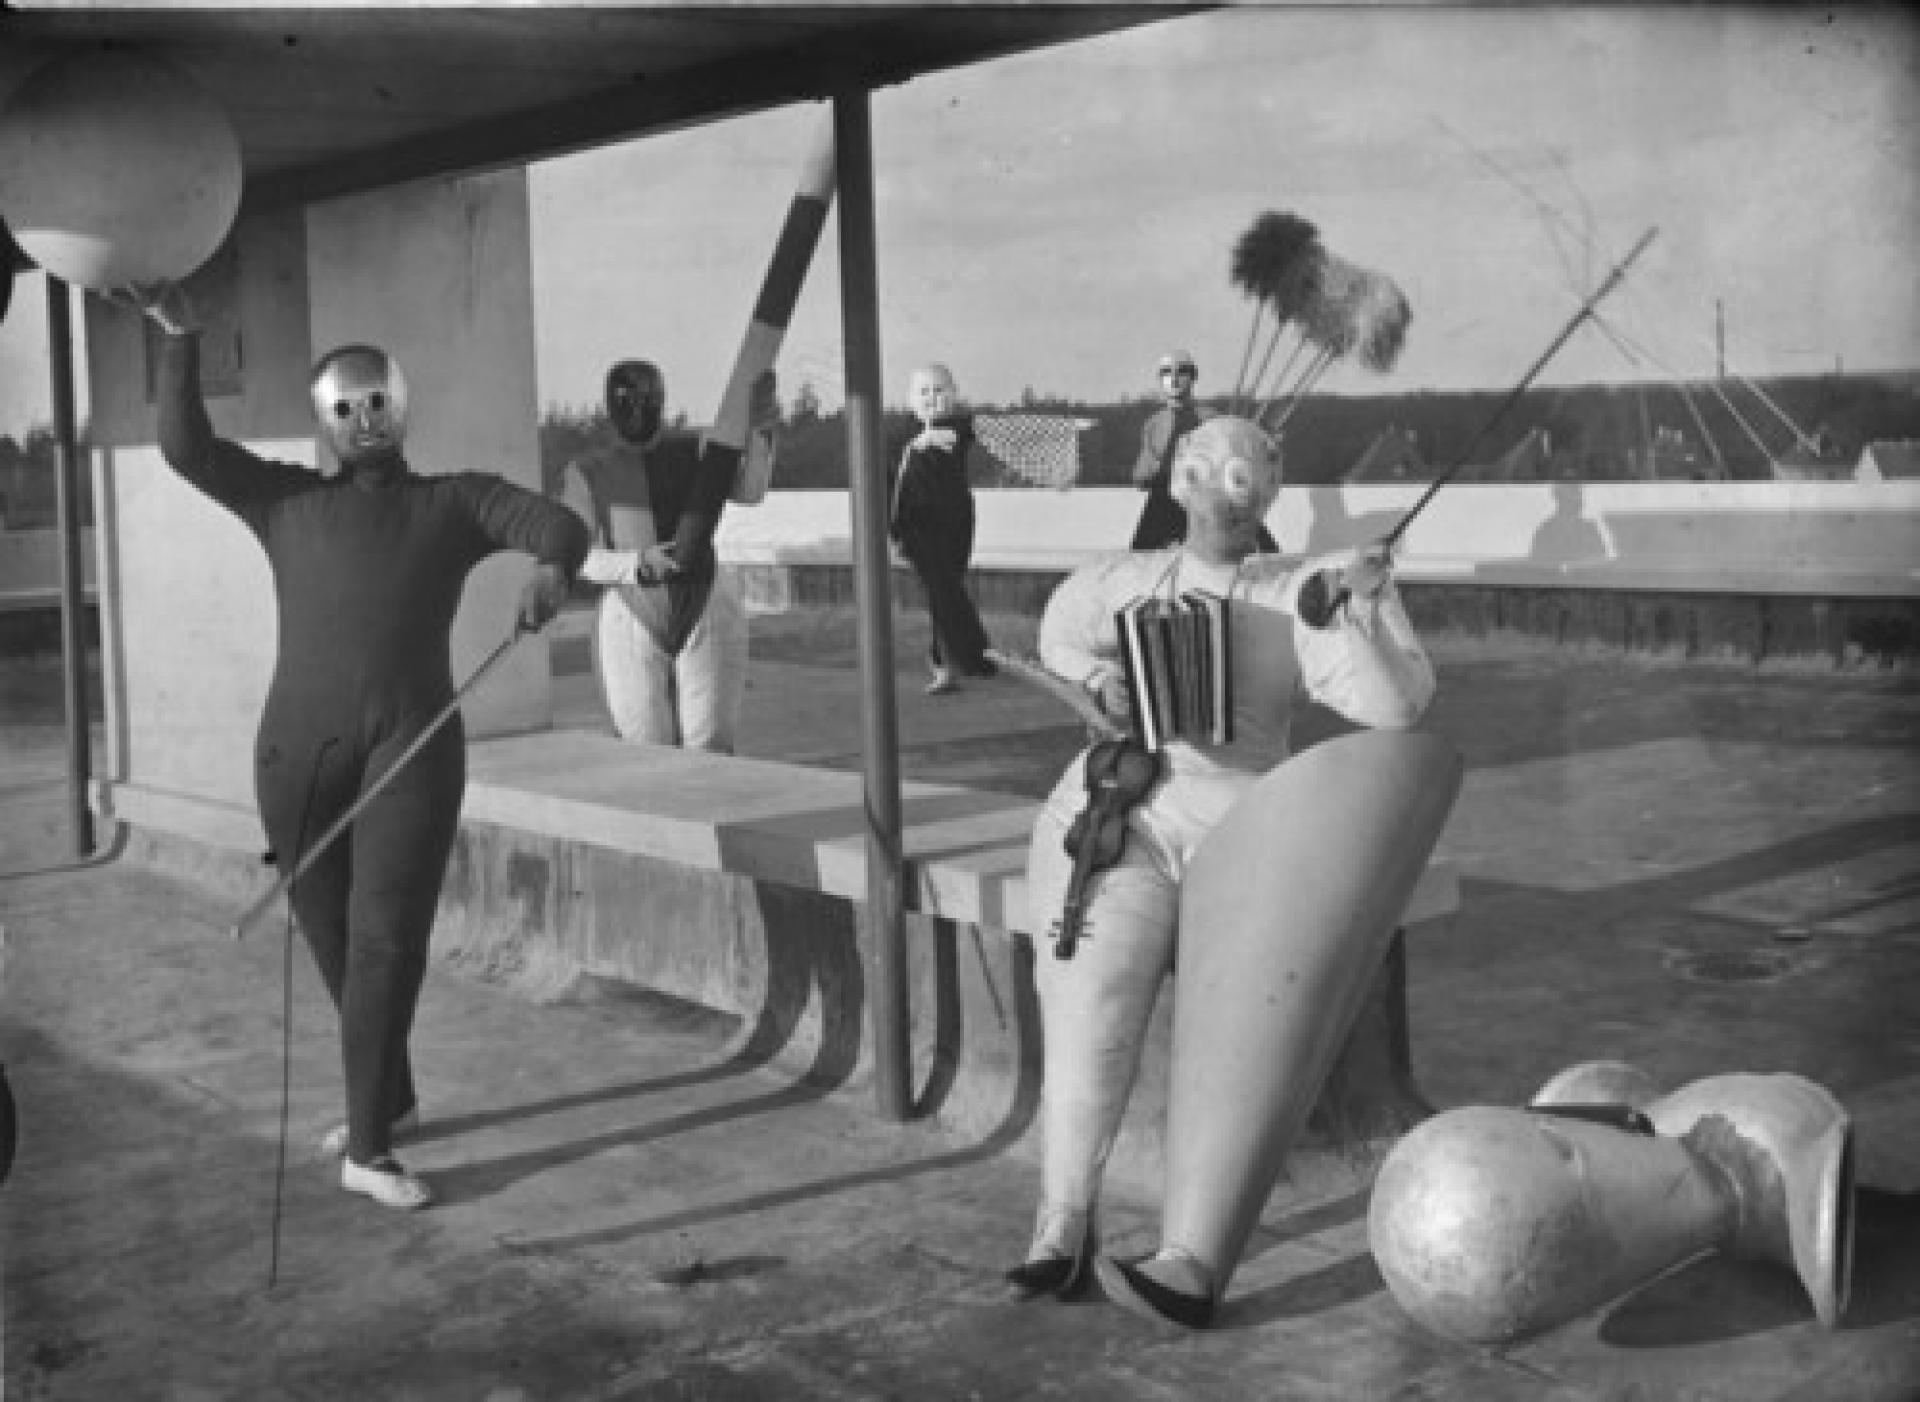 Pantomime “Treppenwitz”, members of the Bauhaus Stage in costumes on the roof of the workshop building, Hermann Röseler (with big stick and mask), Oskar Schlemmer, Roman Clemens (with requisite »A«) and Andor Weininger (as musical clown), 1927 | Photo © Erich Consemüller, Stiftung Bauhaus Dessau